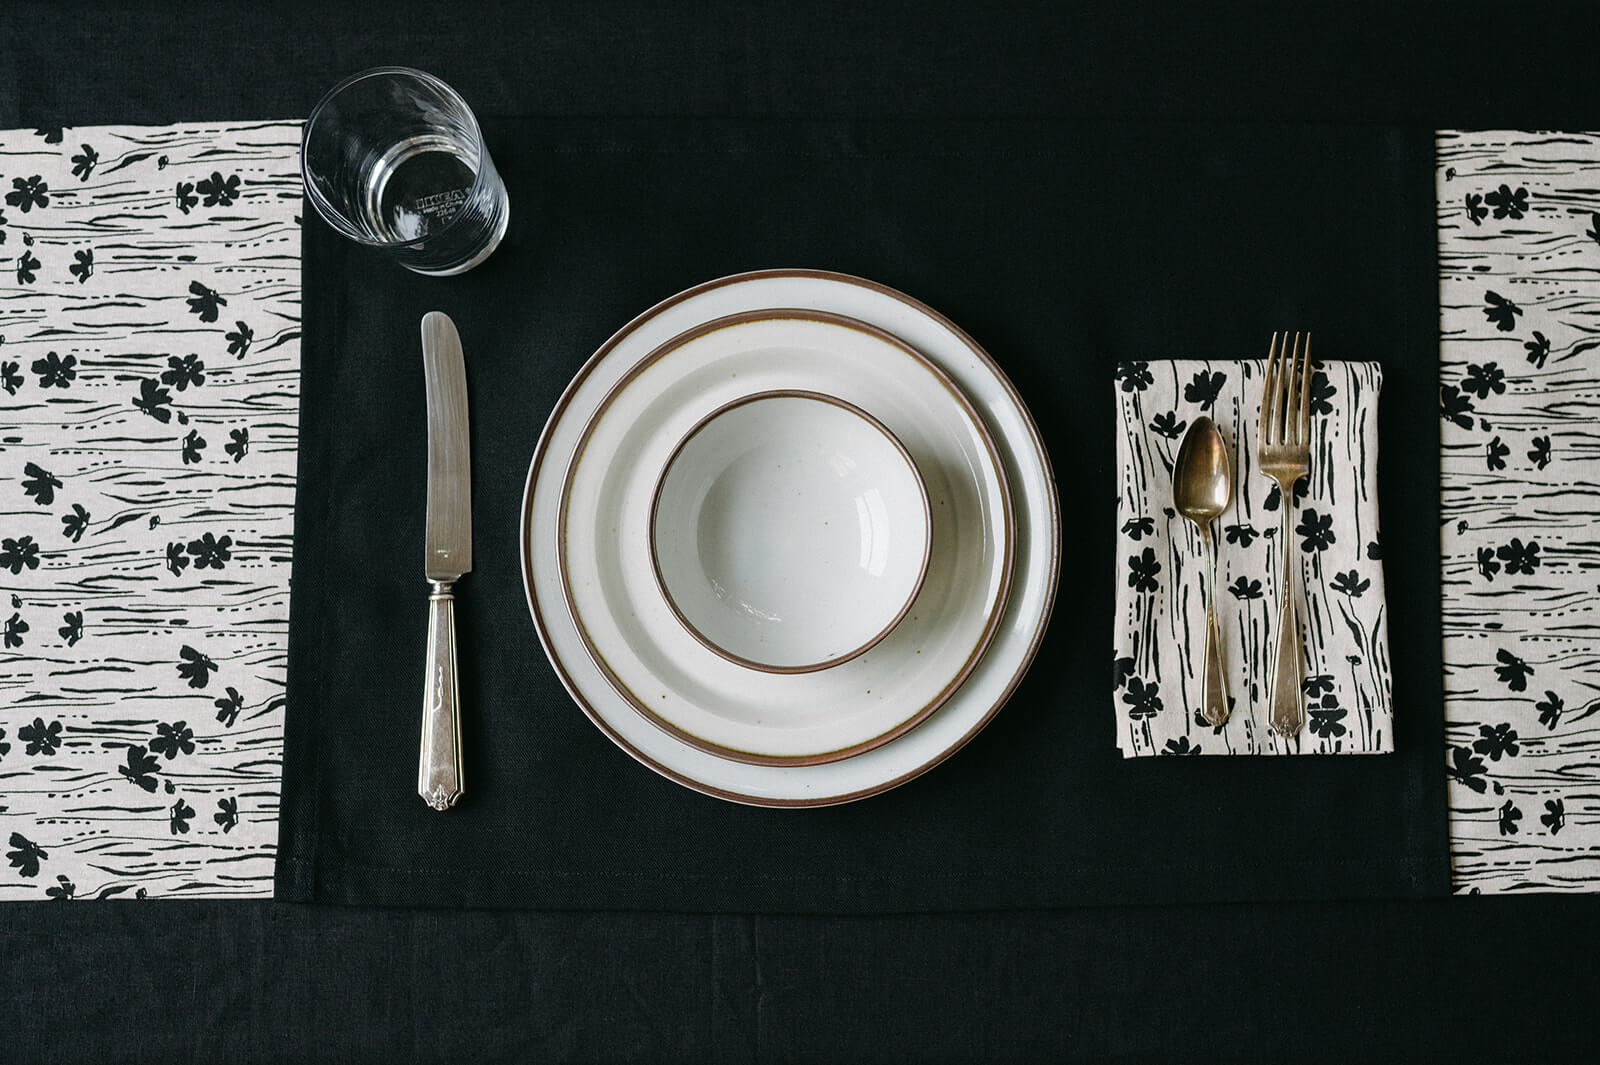 Black and white floral linen table runner with place setting